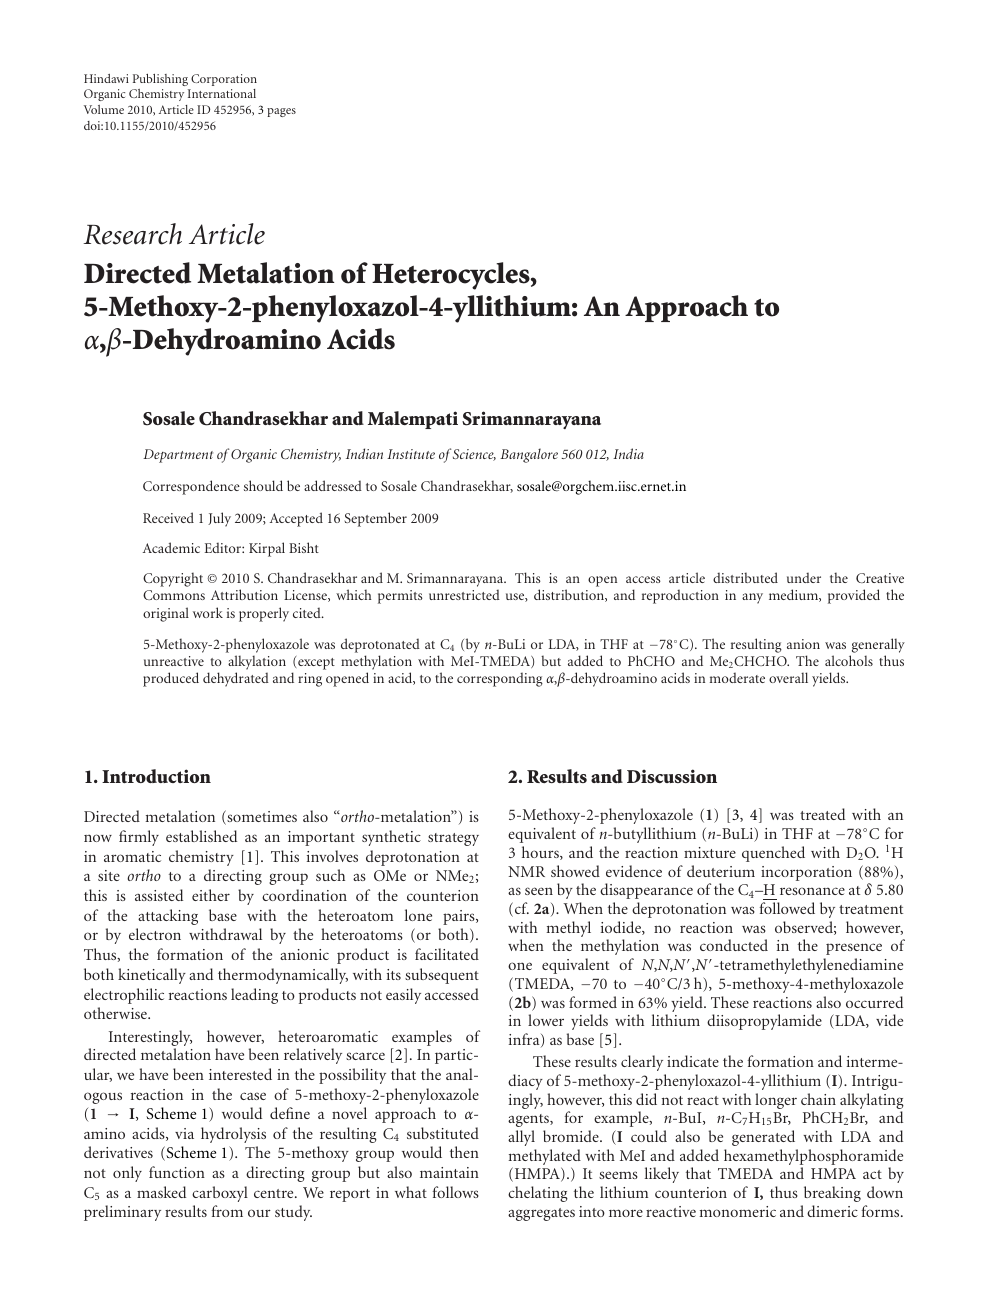 Directed Metalation Of Heterocycles 5 Methoxy 2 Phenyloxazol 4 Yllithium An Approach To A B Dehydroamino Acids Topic Of Research Paper In Chemical Sciences Download Scholarly Article Pdf And Read For Free On Cyberleninka Open